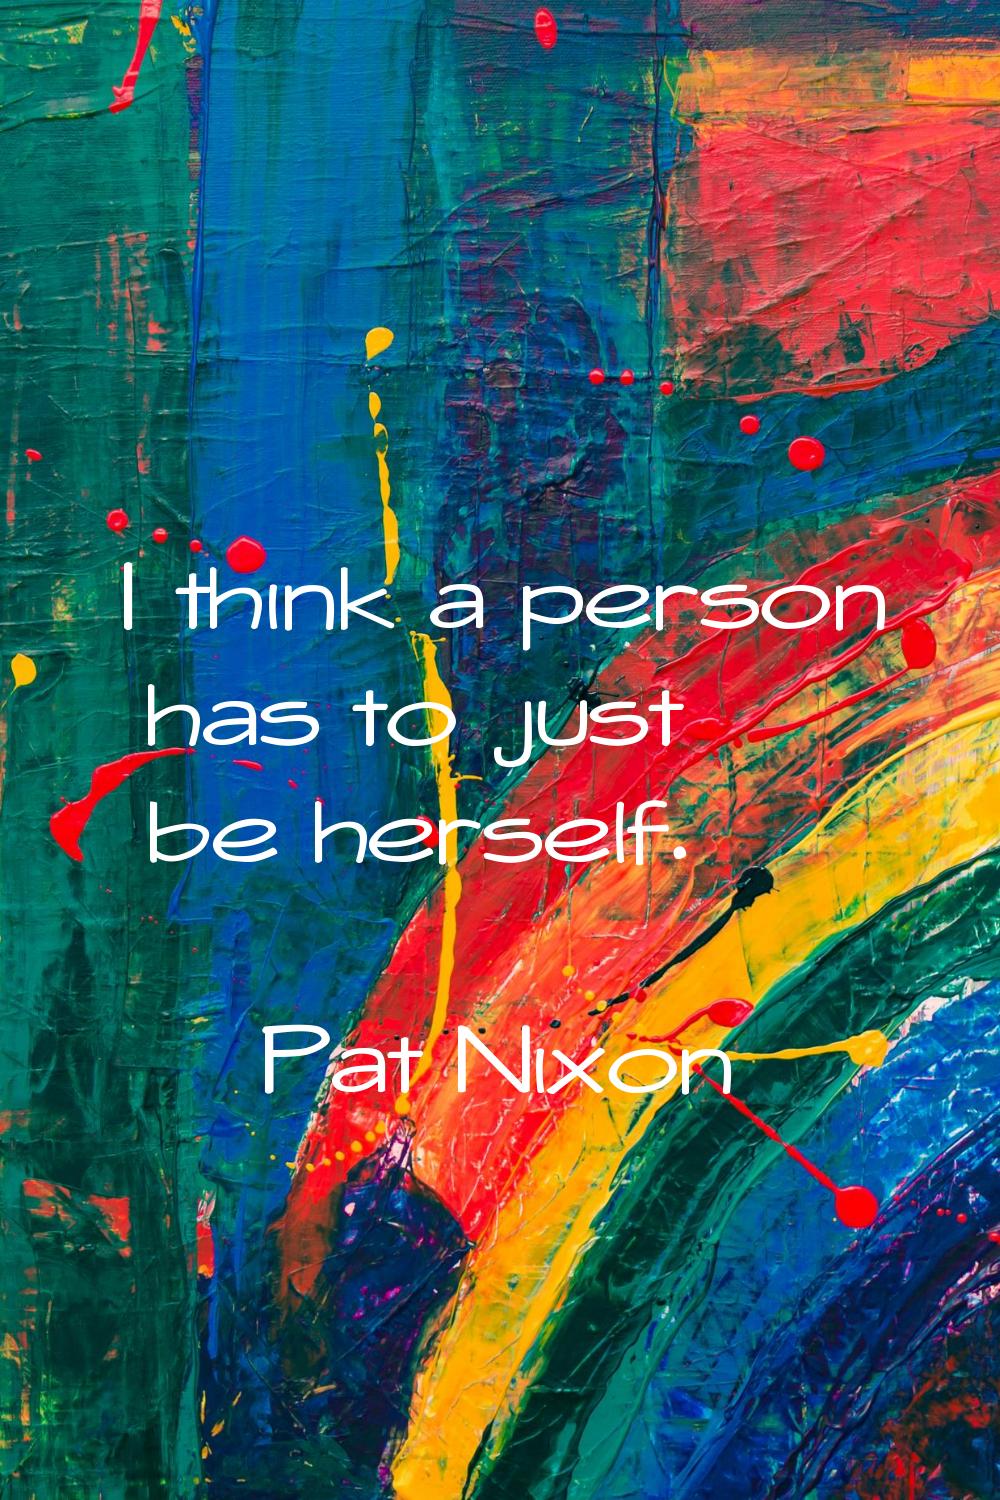 I think a person has to just be herself.